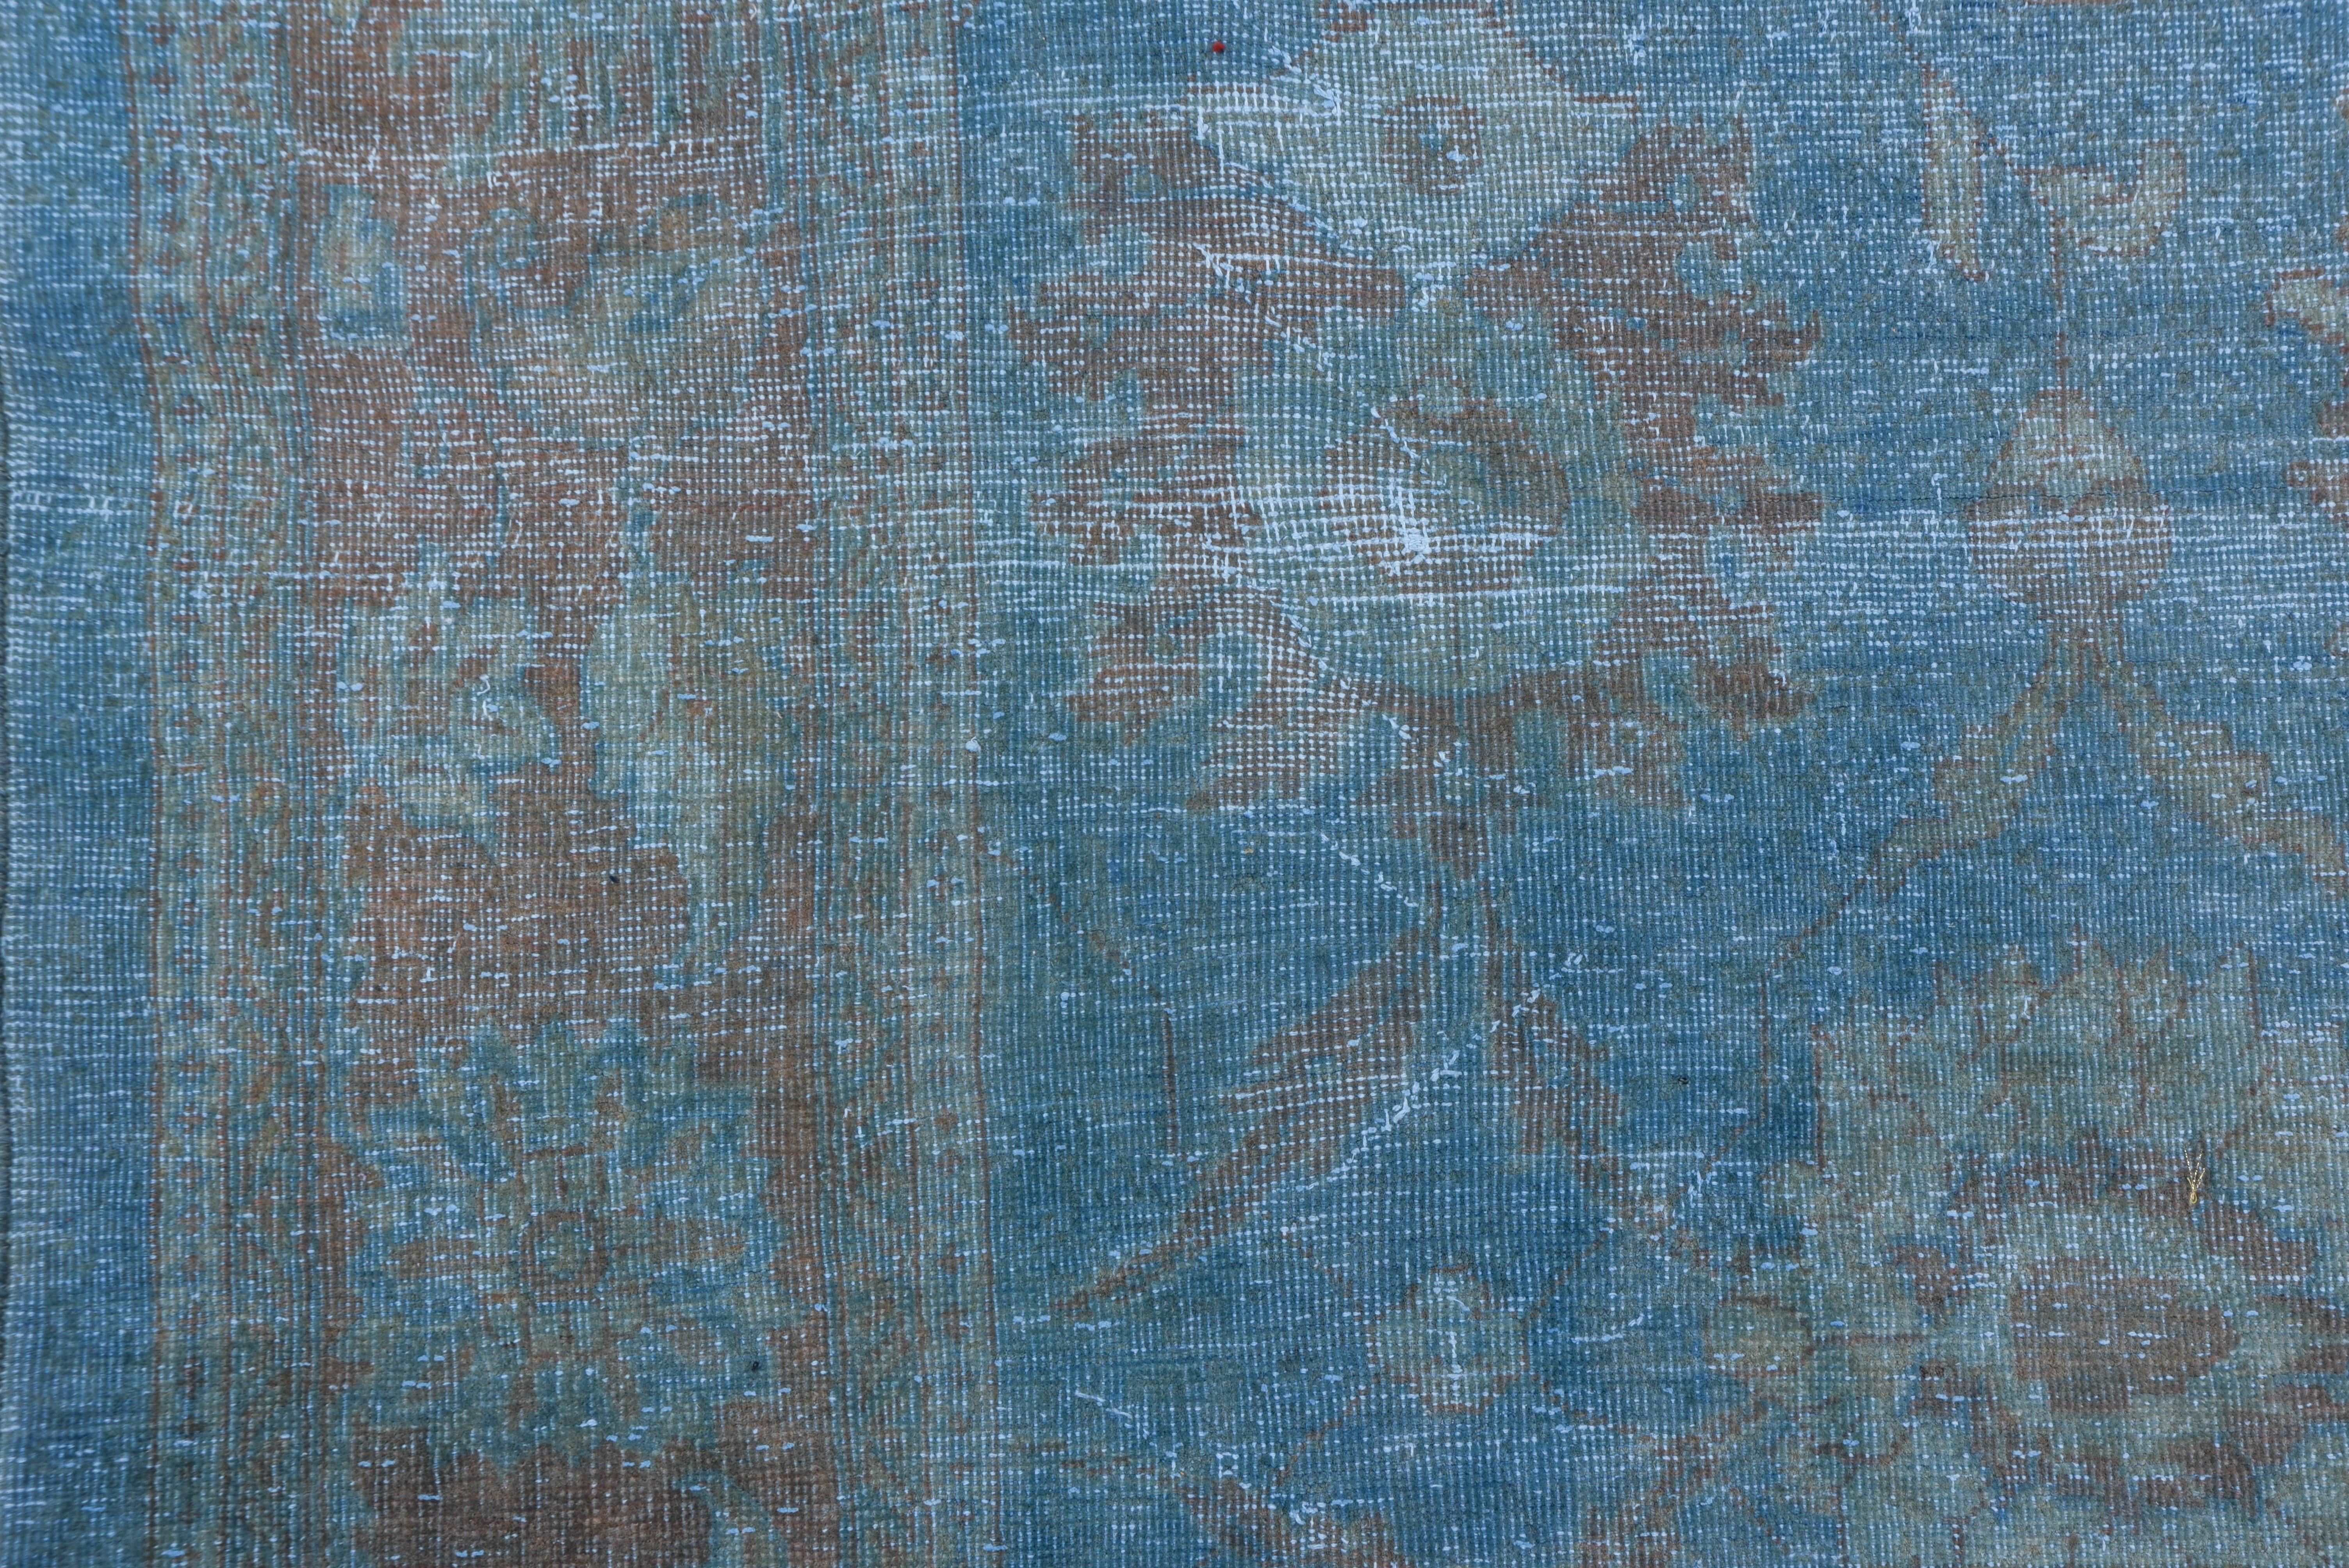 The lucid light blue field displays a symmetric large palmette pattern within a rust palmette border. This west Persian village carpet lightly distressed and decorative.